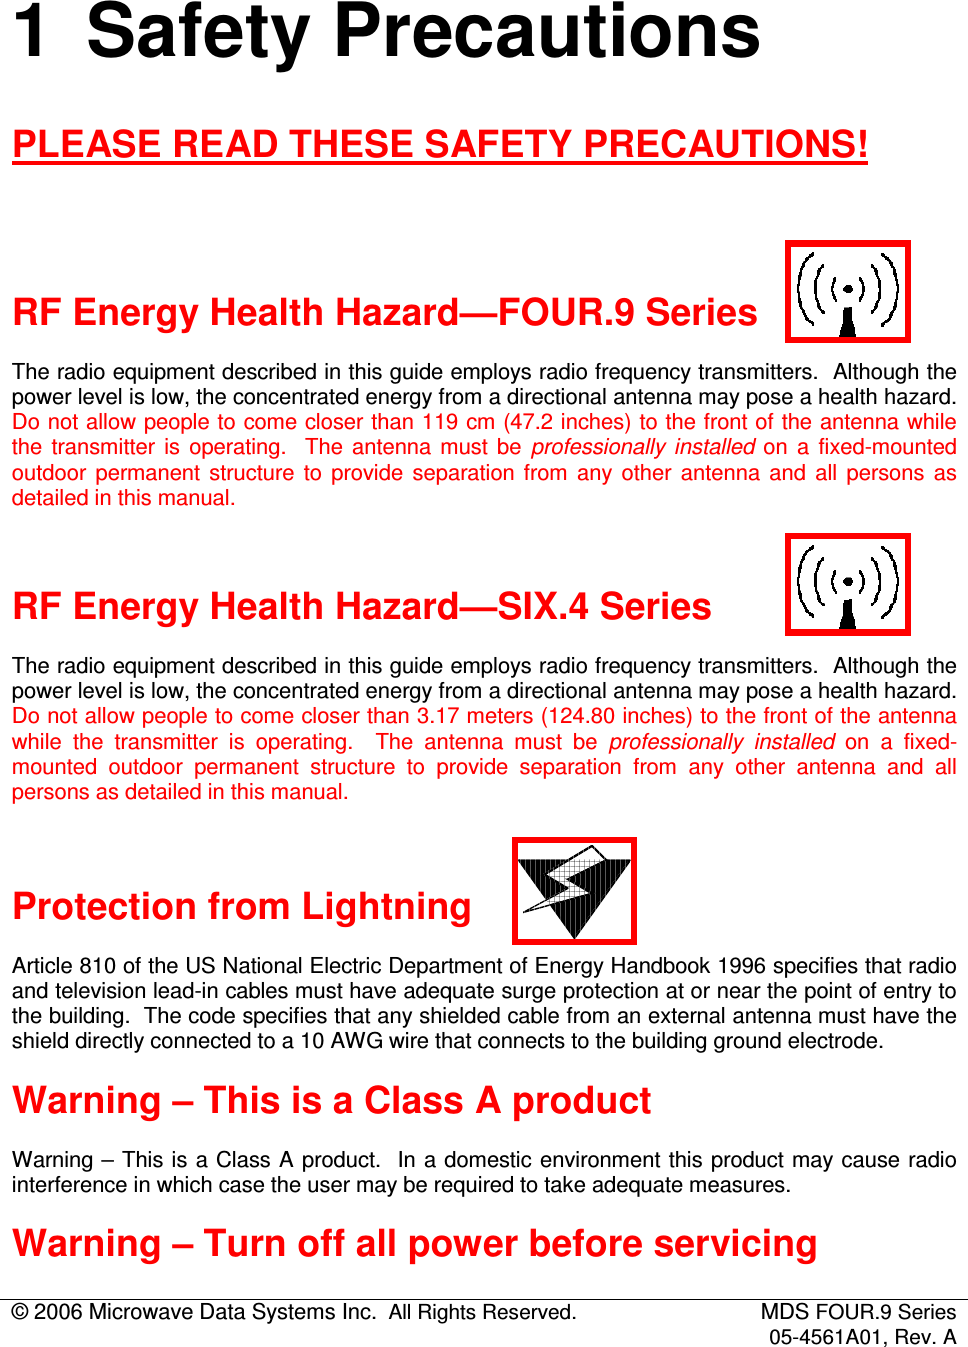 © 2006 Microwave Data Systems Inc.  All Rights Reserved.  MDS FOUR.9 Series 05-4561A01, Rev. A  1  Safety Precautions PLEASE READ THESE SAFETY PRECAUTIONS!   RF Energy Health Hazard—FOUR.9 Series The radio equipment described in this guide employs radio frequency transmitters.  Although the power level is low, the concentrated energy from a directional antenna may pose a health hazard.  Do not allow people to come closer than 119 cm (47.2 inches) to the front of the antenna while the  transmitter  is  operating.    The  antenna  must  be  professionally  installed  on  a  fixed-mounted outdoor  permanent  structure  to  provide  separation  from  any  other  antenna  and  all  persons  as detailed in this manual.  RF Energy Health Hazard—SIX.4 Series The radio equipment described in this guide employs radio frequency transmitters.  Although the power level is low, the concentrated energy from a directional antenna may pose a health hazard.  Do not allow people to come closer than 3.17 meters (124.80 inches) to the front of the antenna while  the  transmitter  is  operating.    The  antenna  must  be  professionally  installed  on  a  fixed-mounted  outdoor  permanent  structure  to  provide  separation  from  any  other  antenna  and  all persons as detailed in this manual.  Protection from Lightning Article 810 of the US National Electric Department of Energy Handbook 1996 specifies that radio and television lead-in cables must have adequate surge protection at or near the point of entry to the building.  The code specifies that any shielded cable from an external antenna must have the shield directly connected to a 10 AWG wire that connects to the building ground electrode. Warning – This is a Class A product Warning – This is a Class A product.  In a domestic environment this product may cause radio interference in which case the user may be required to take adequate measures. Warning – Turn off all power before servicing 